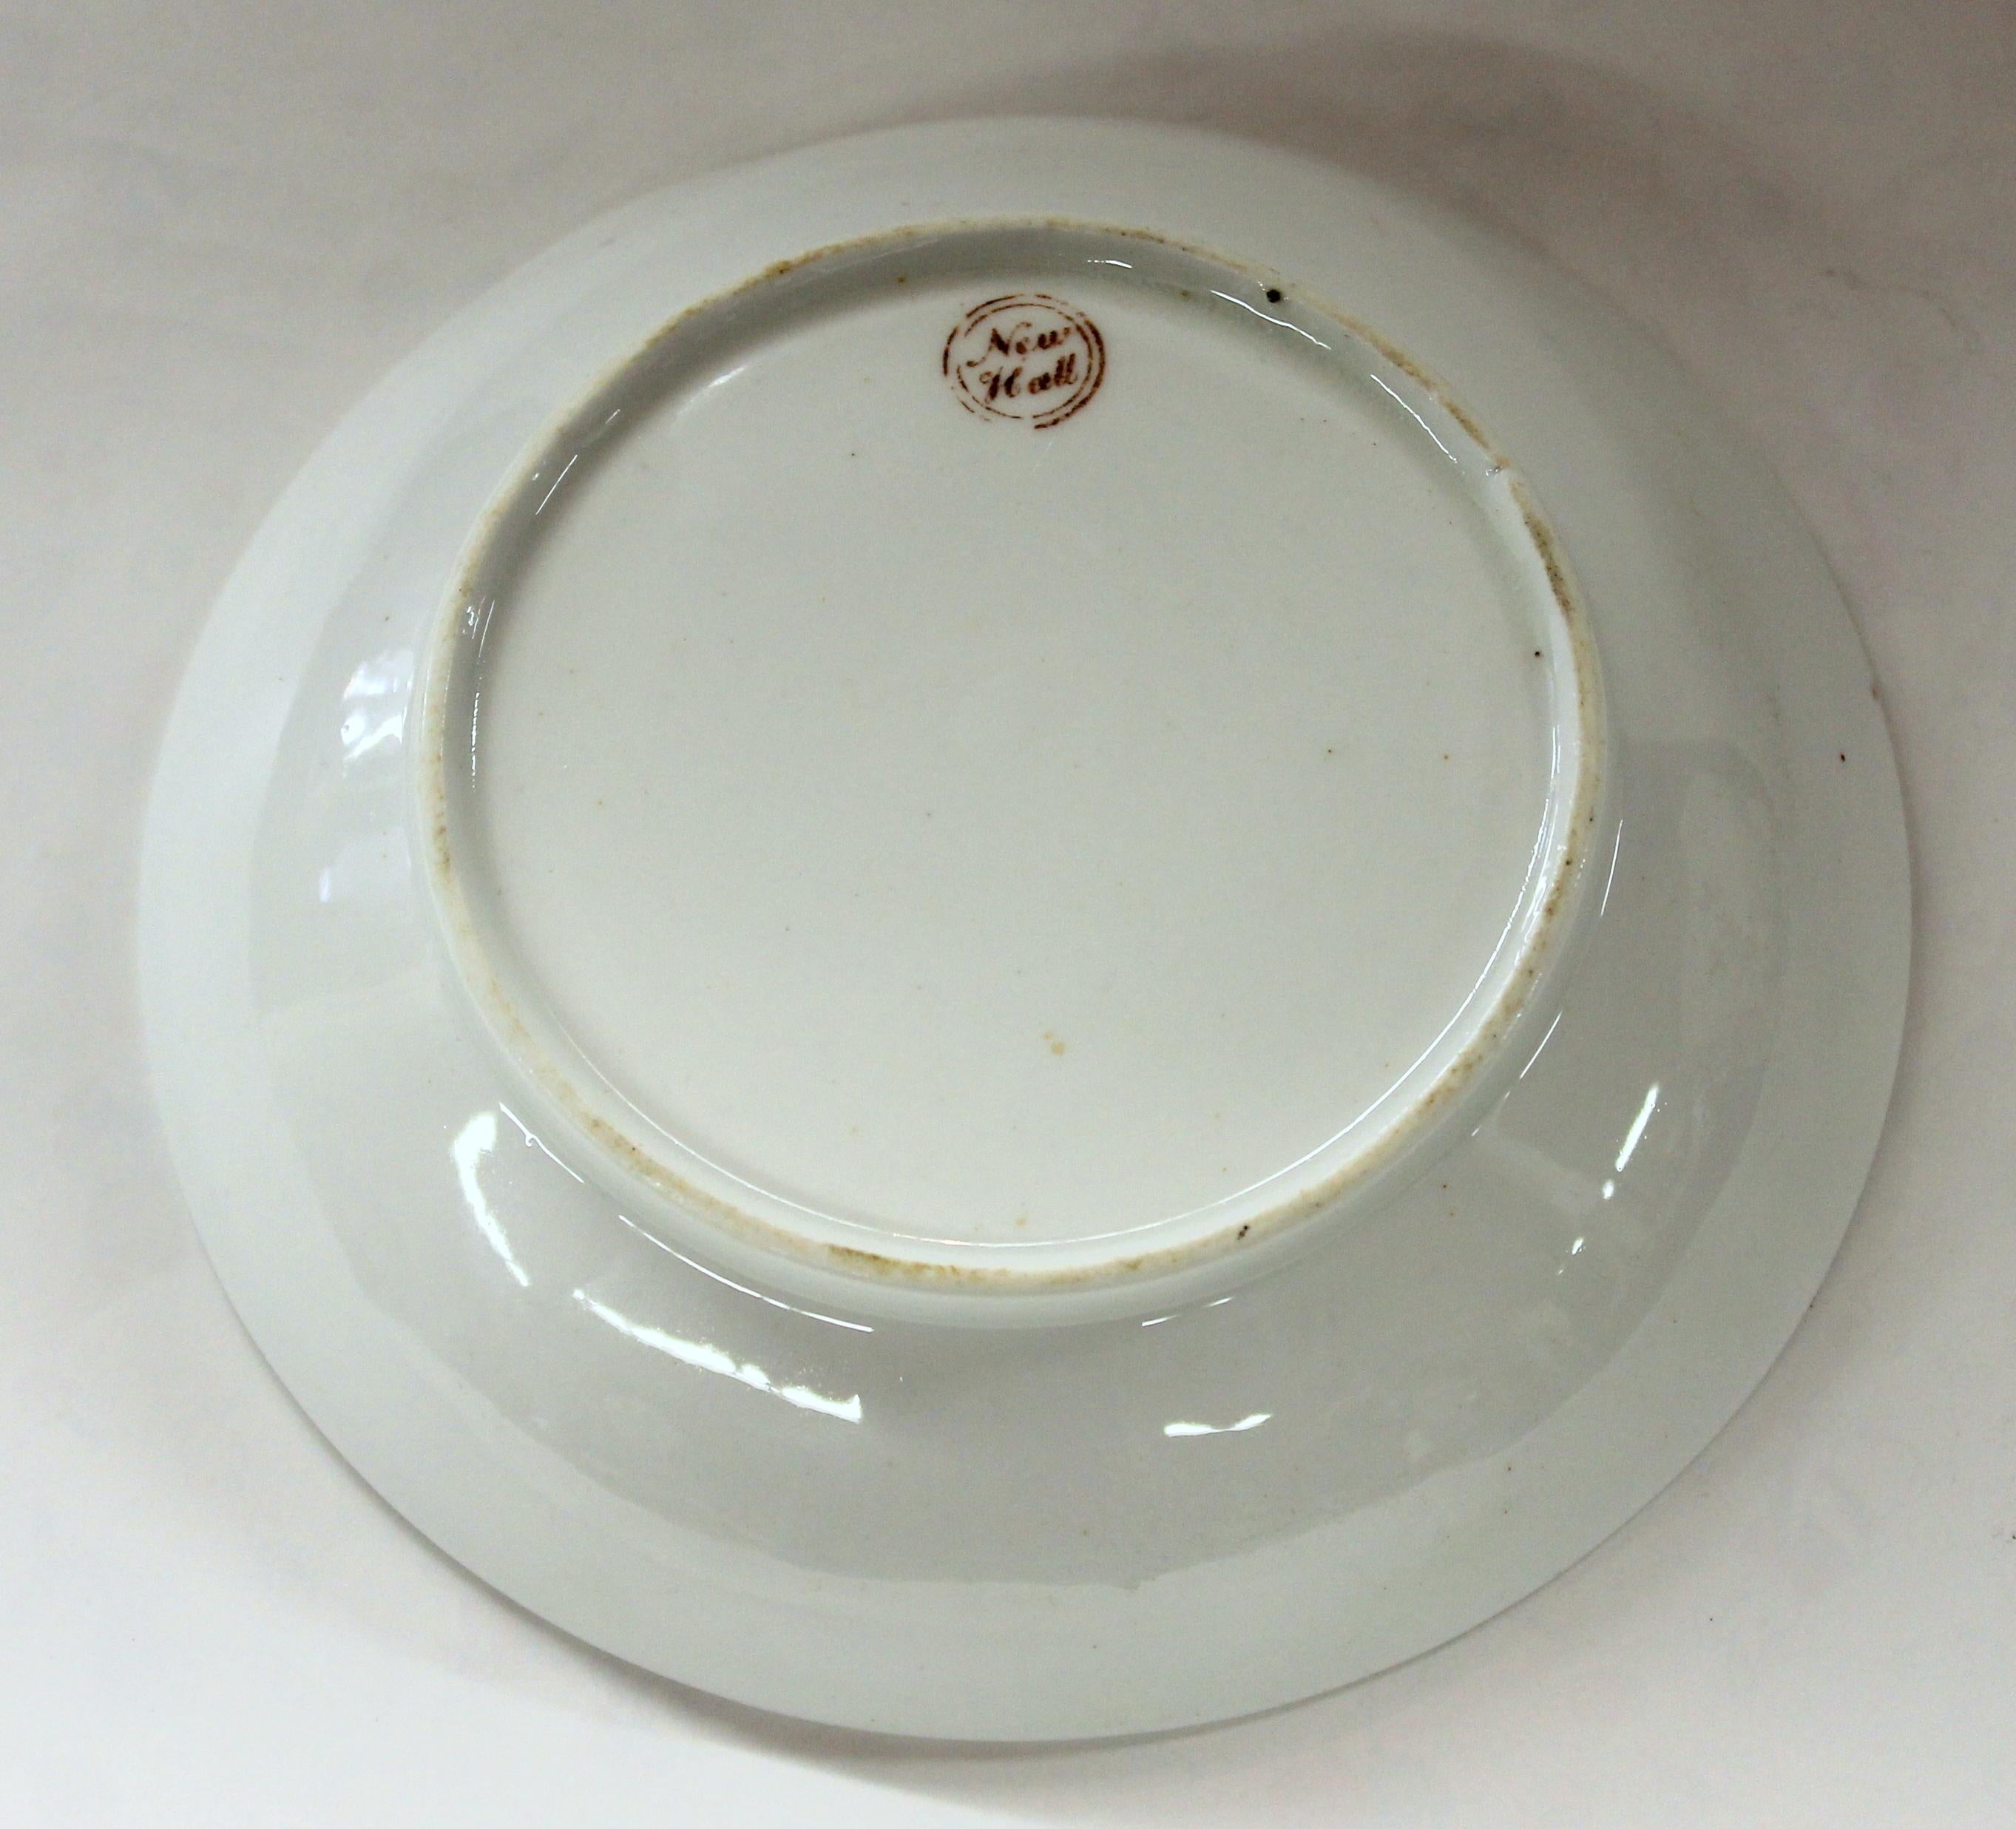 English Early 19th Century New Hall Porcelain Floral Decor Cup and Saucer For Sale 2